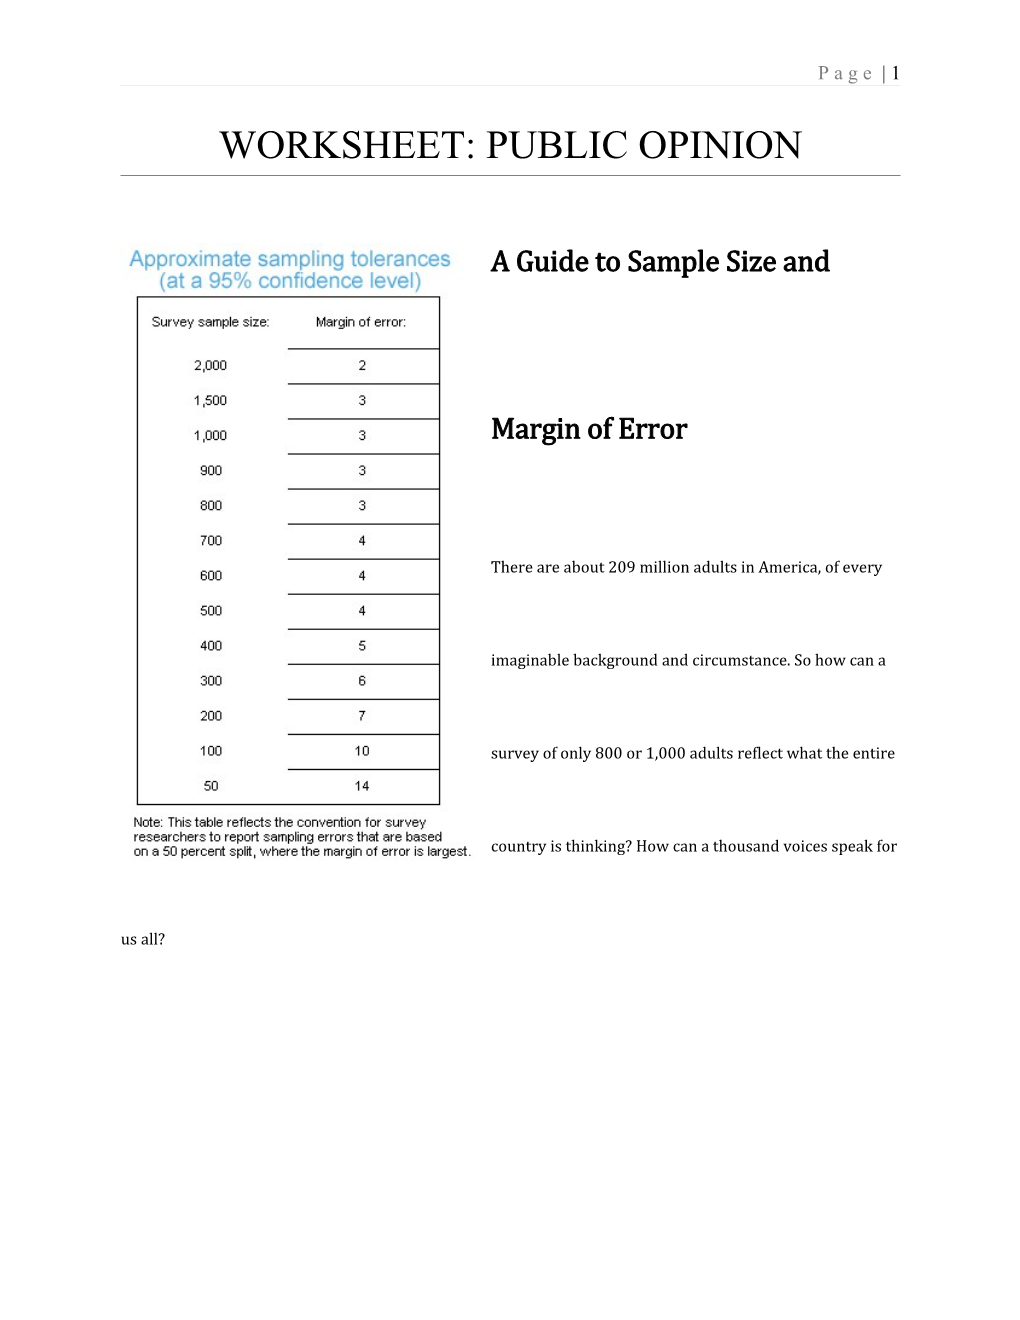 A Guide to Sample Size and Margin of Error